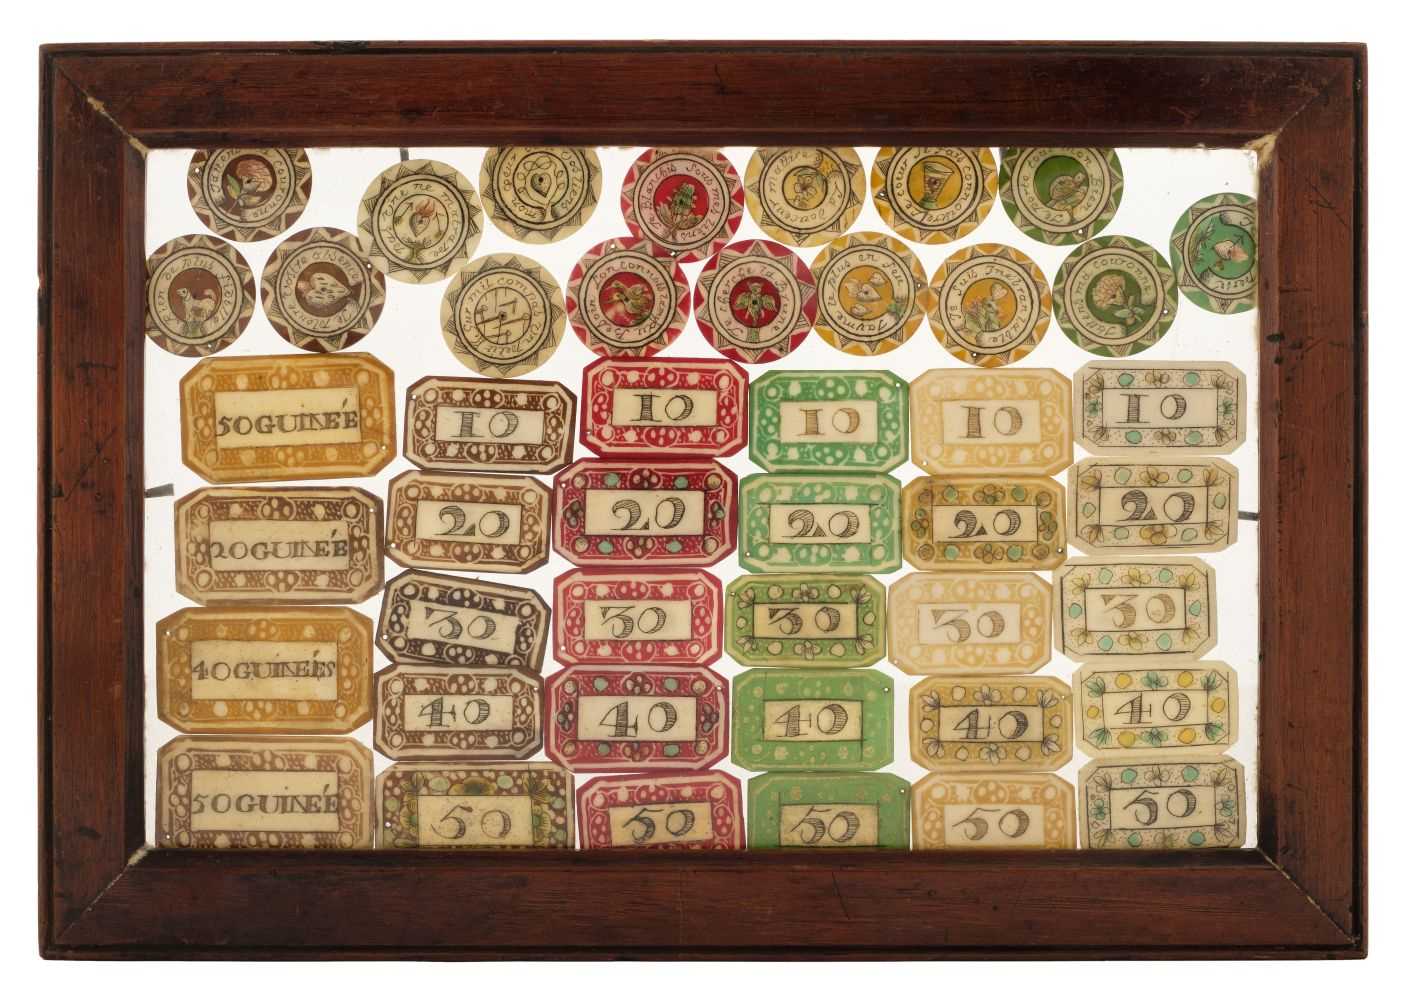 Lot 115 - Game. A collection of early 18th century French ivory counters